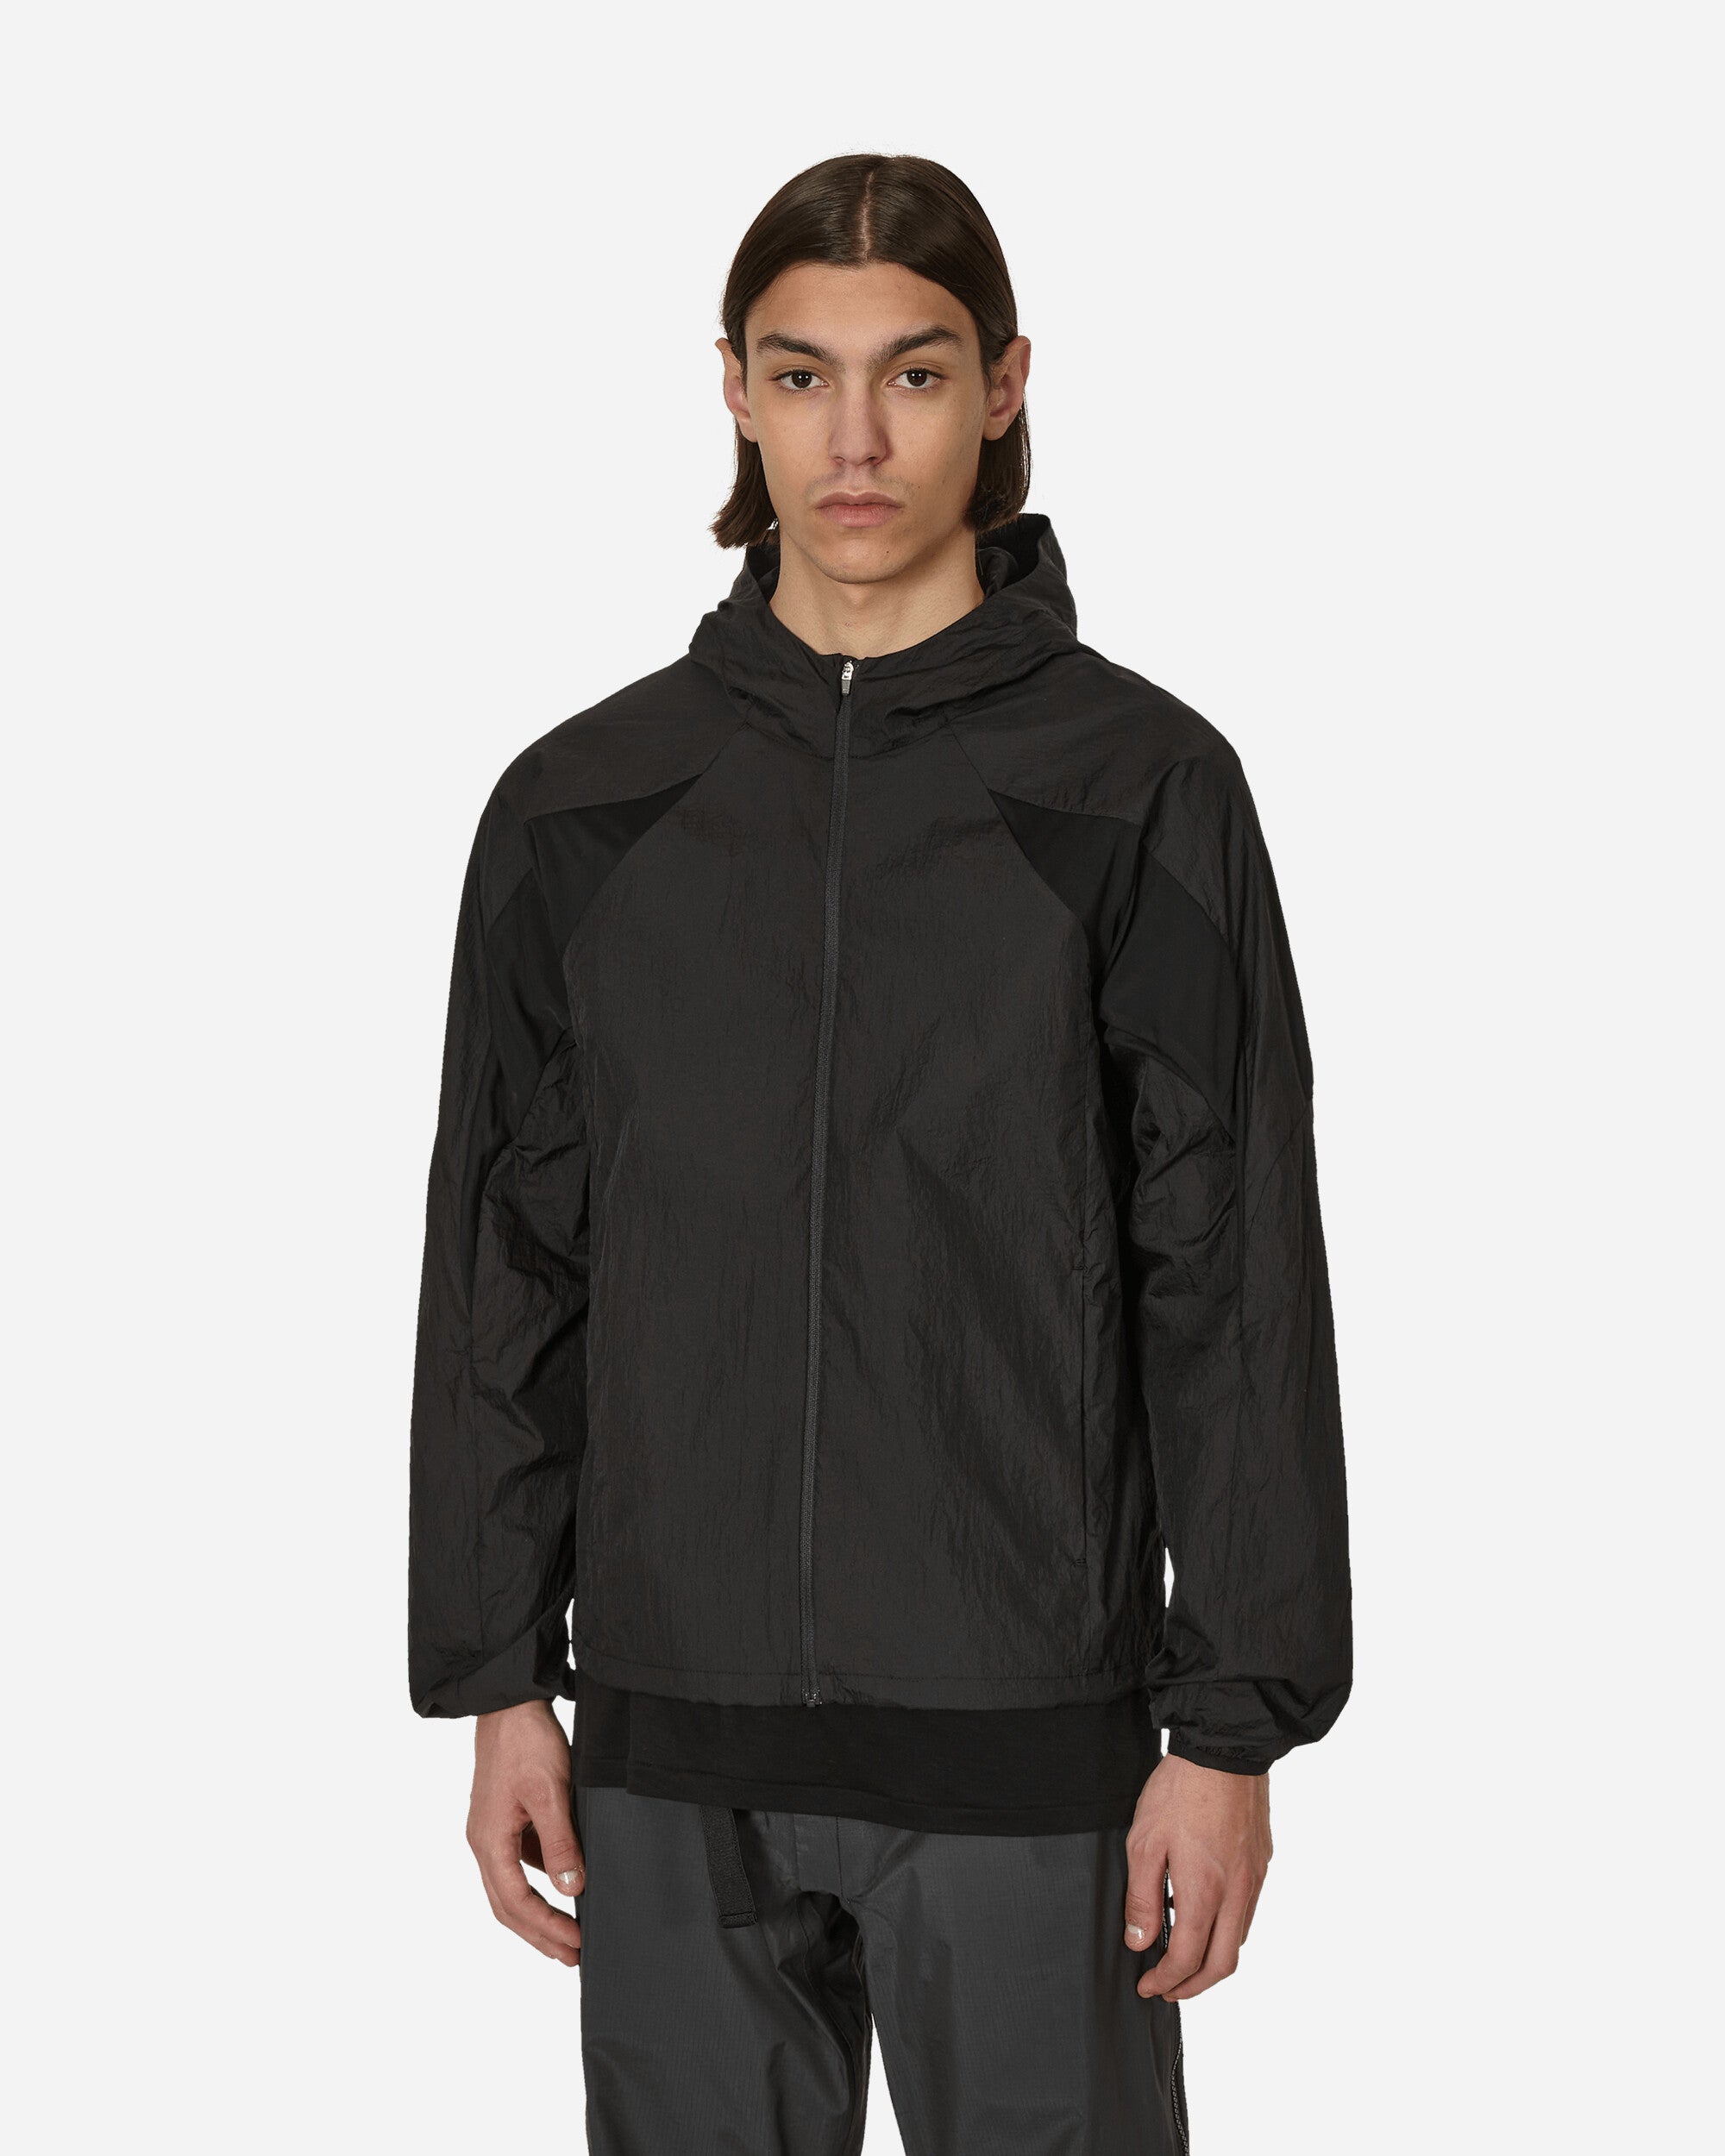 Post Archive Faction (PAF) 5.0+ Technical Jacket Right Black